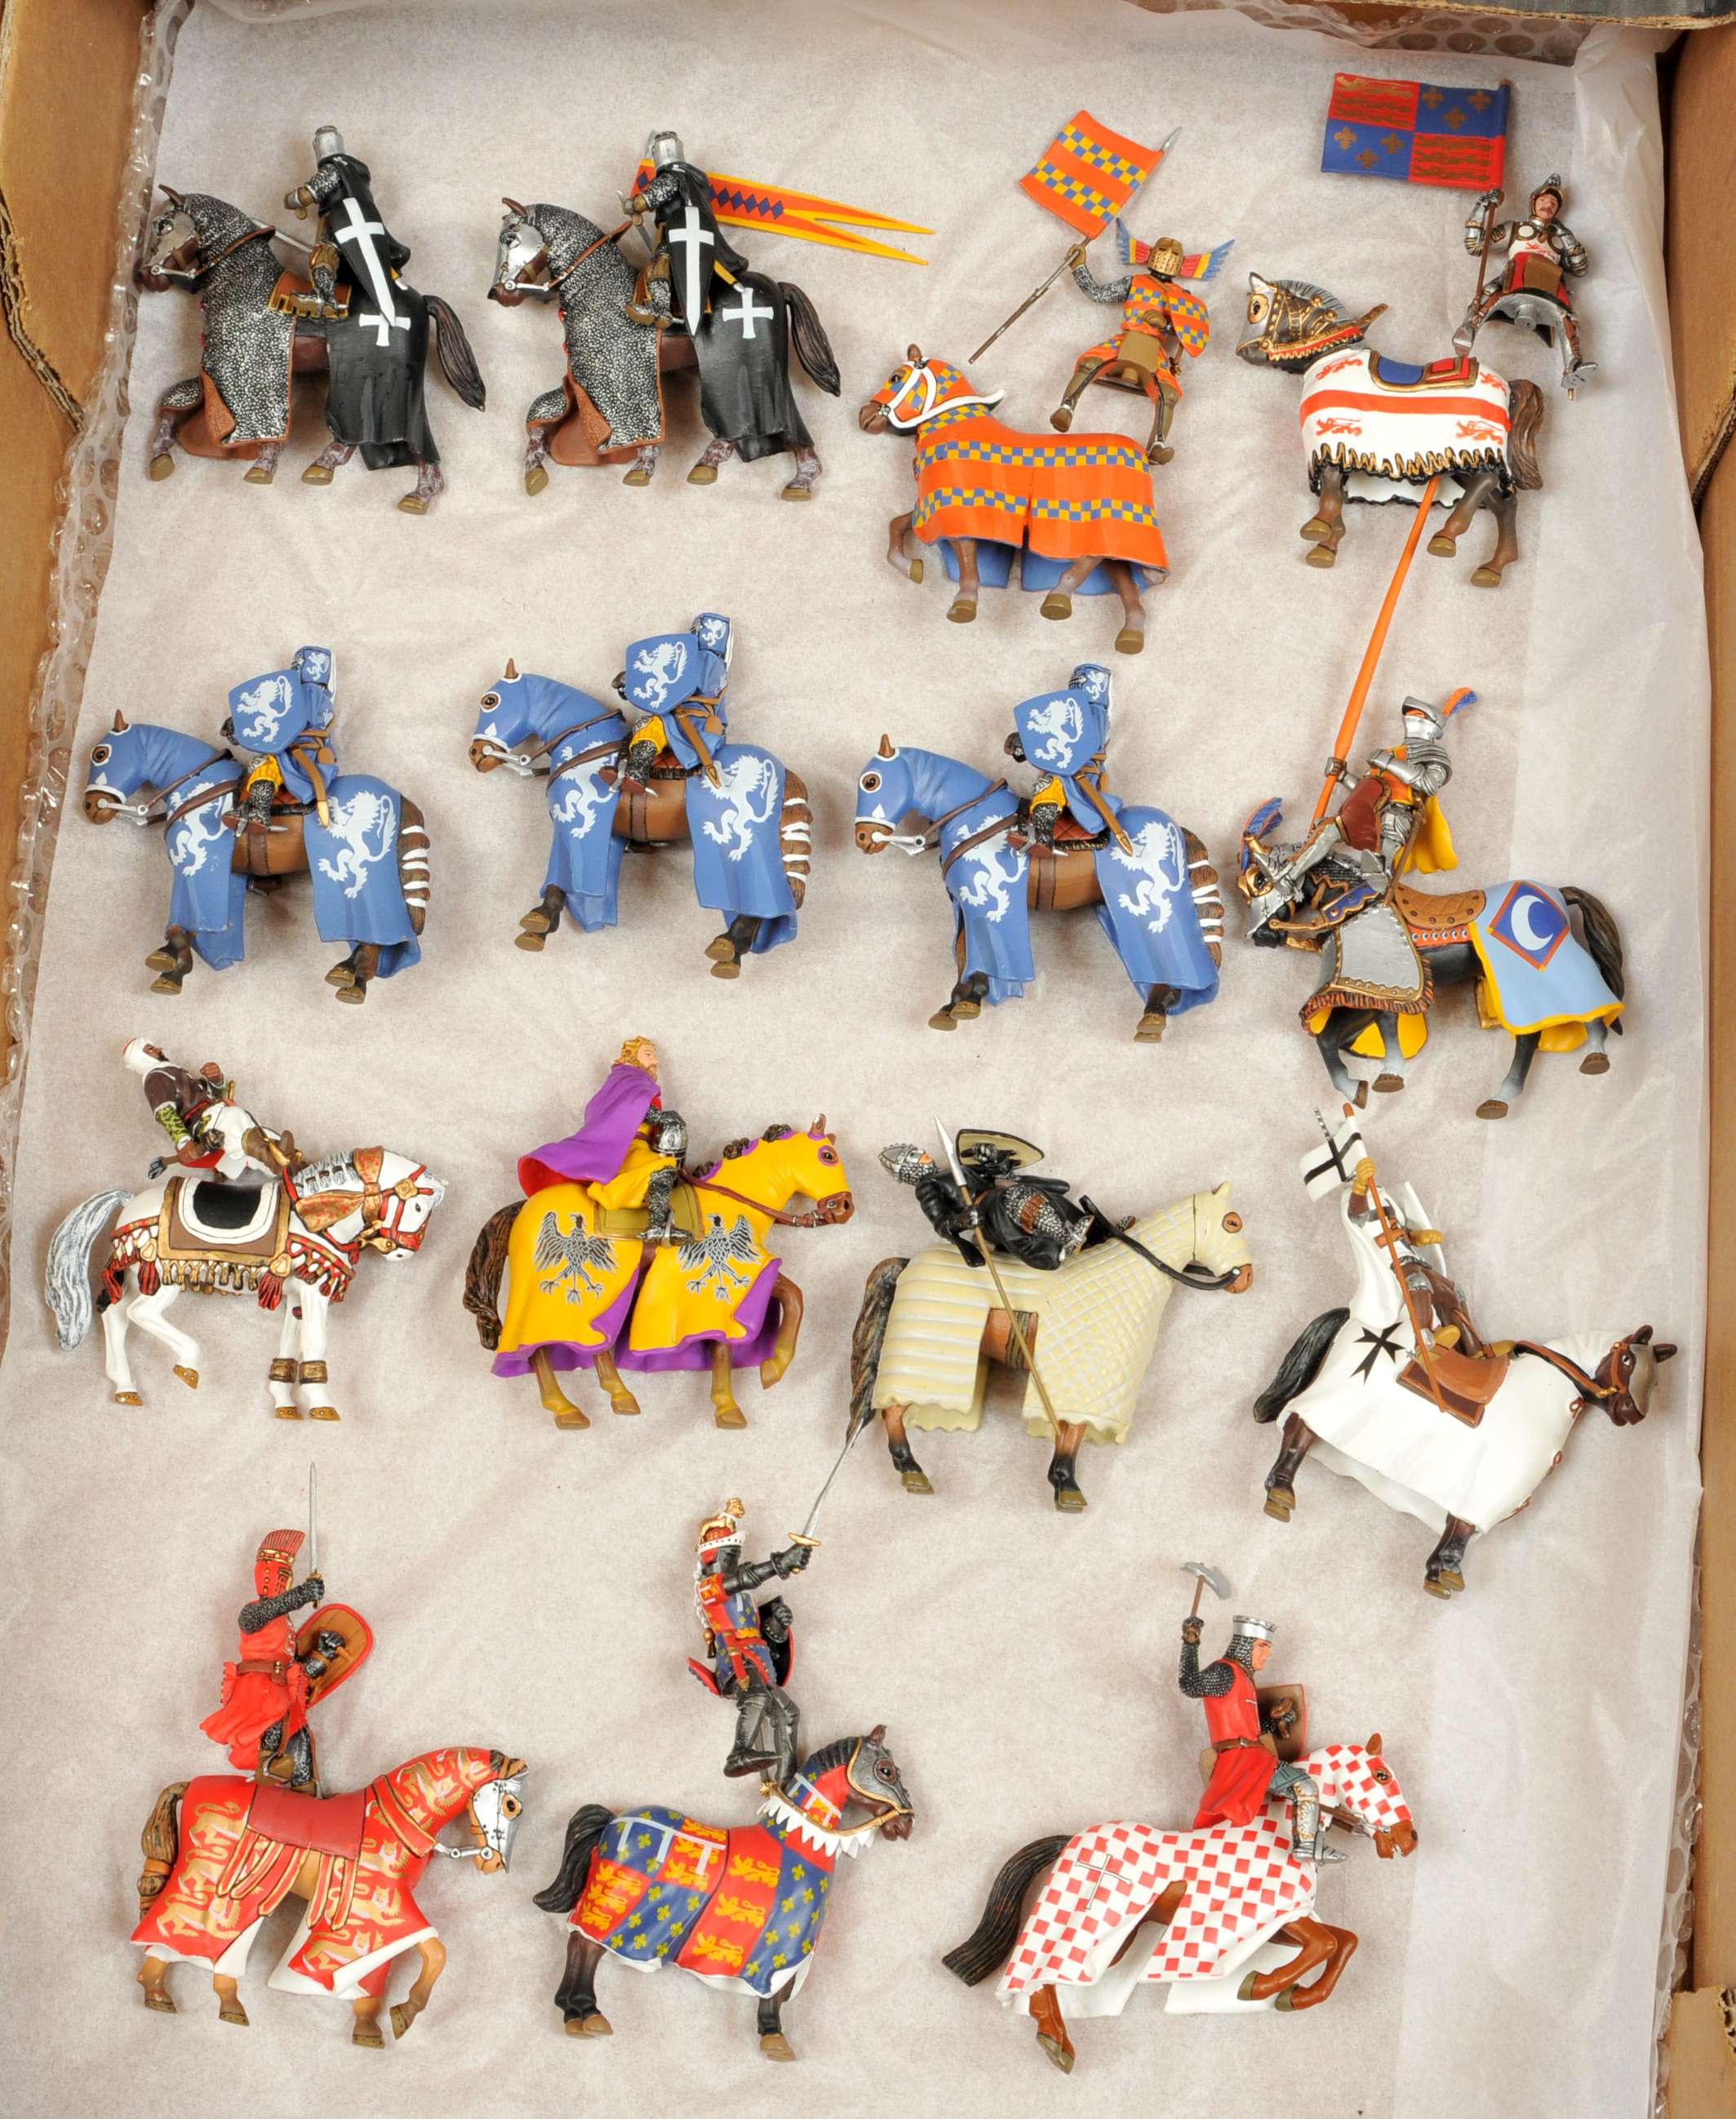 Frontline Figures / De Agostini - Medieval Knights & Similar, Unboxed - Image 2 of 3